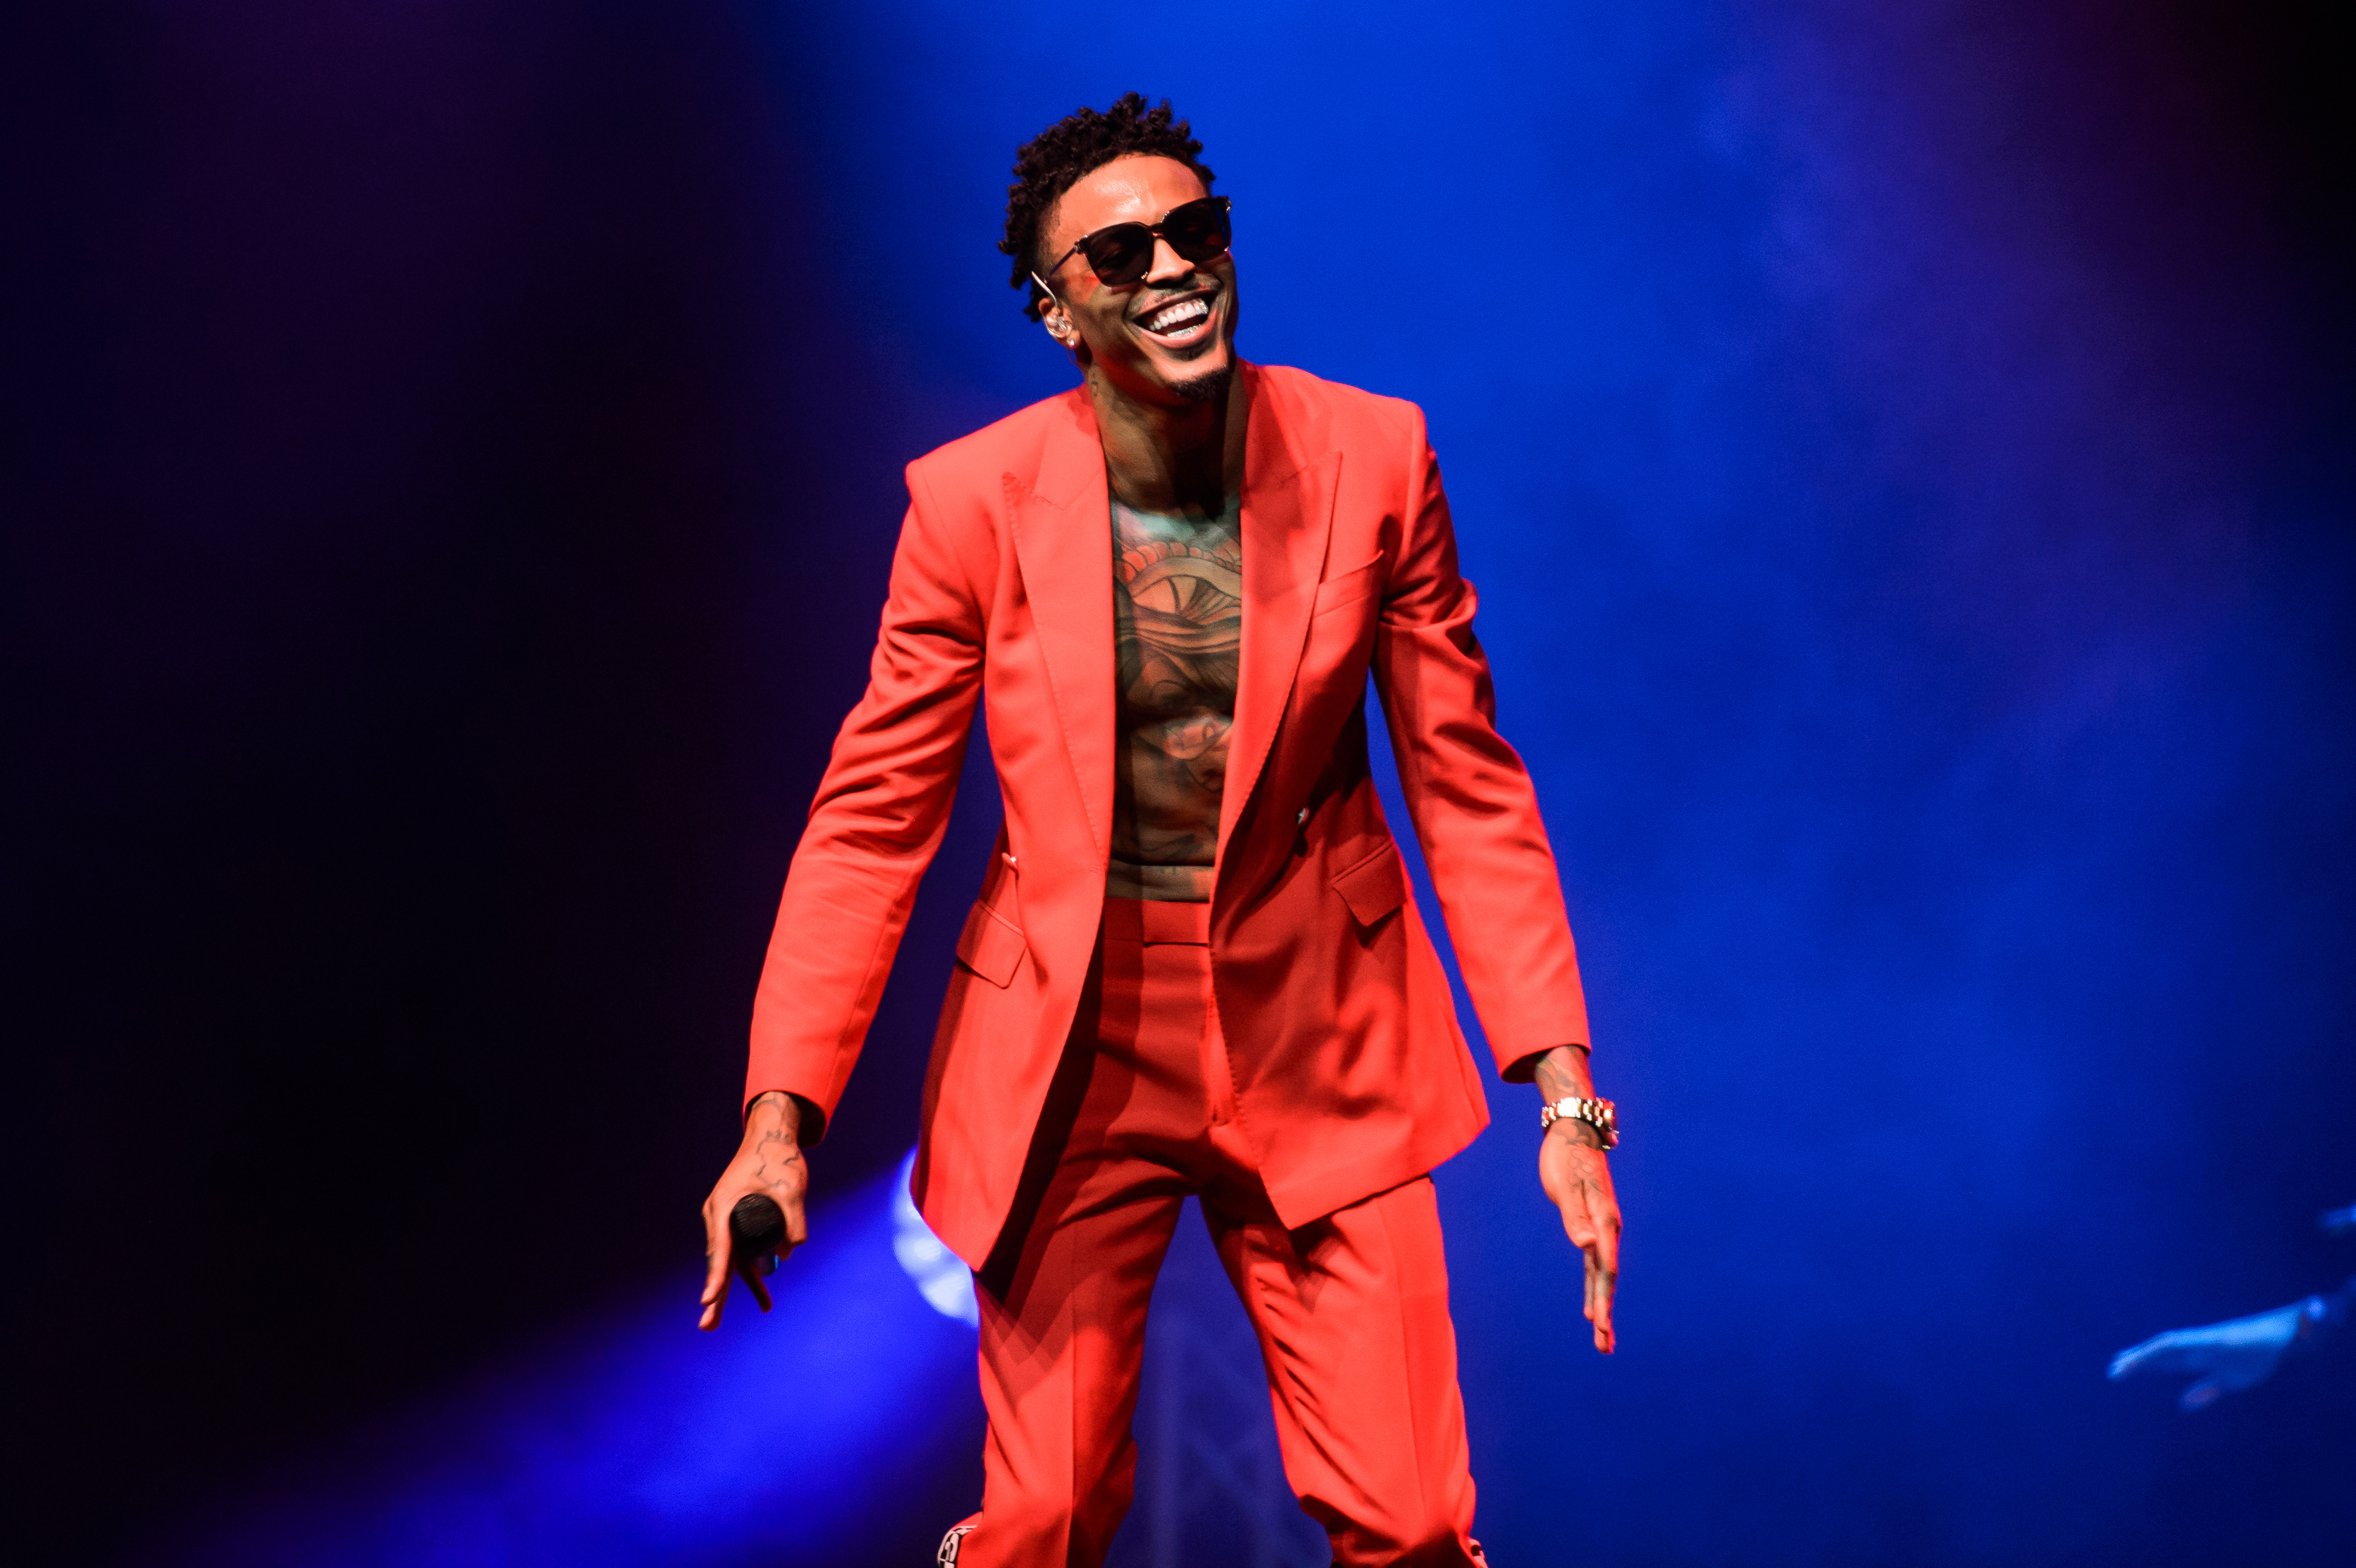 August Alsina performs live on stage at Indigo at The O2 Arena on January 23, 2018, in London, England. | Source: Getty Images